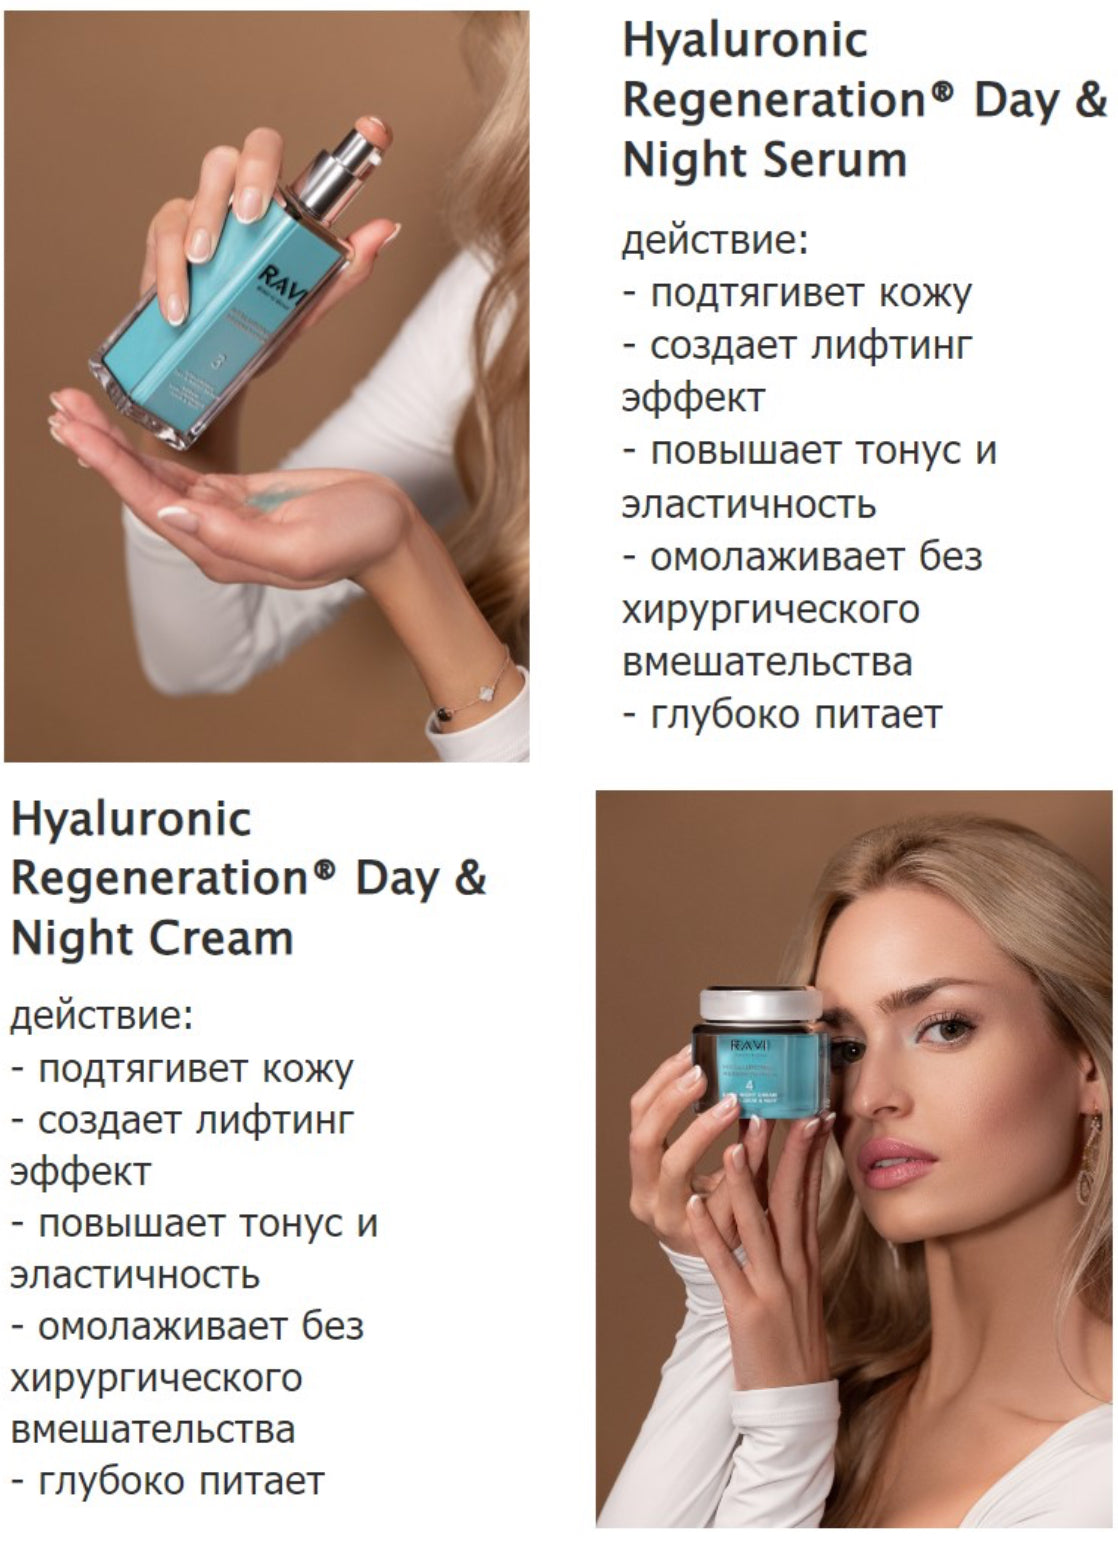 4-steps Hyaluronic Regeneration® Anti-Aging Care System